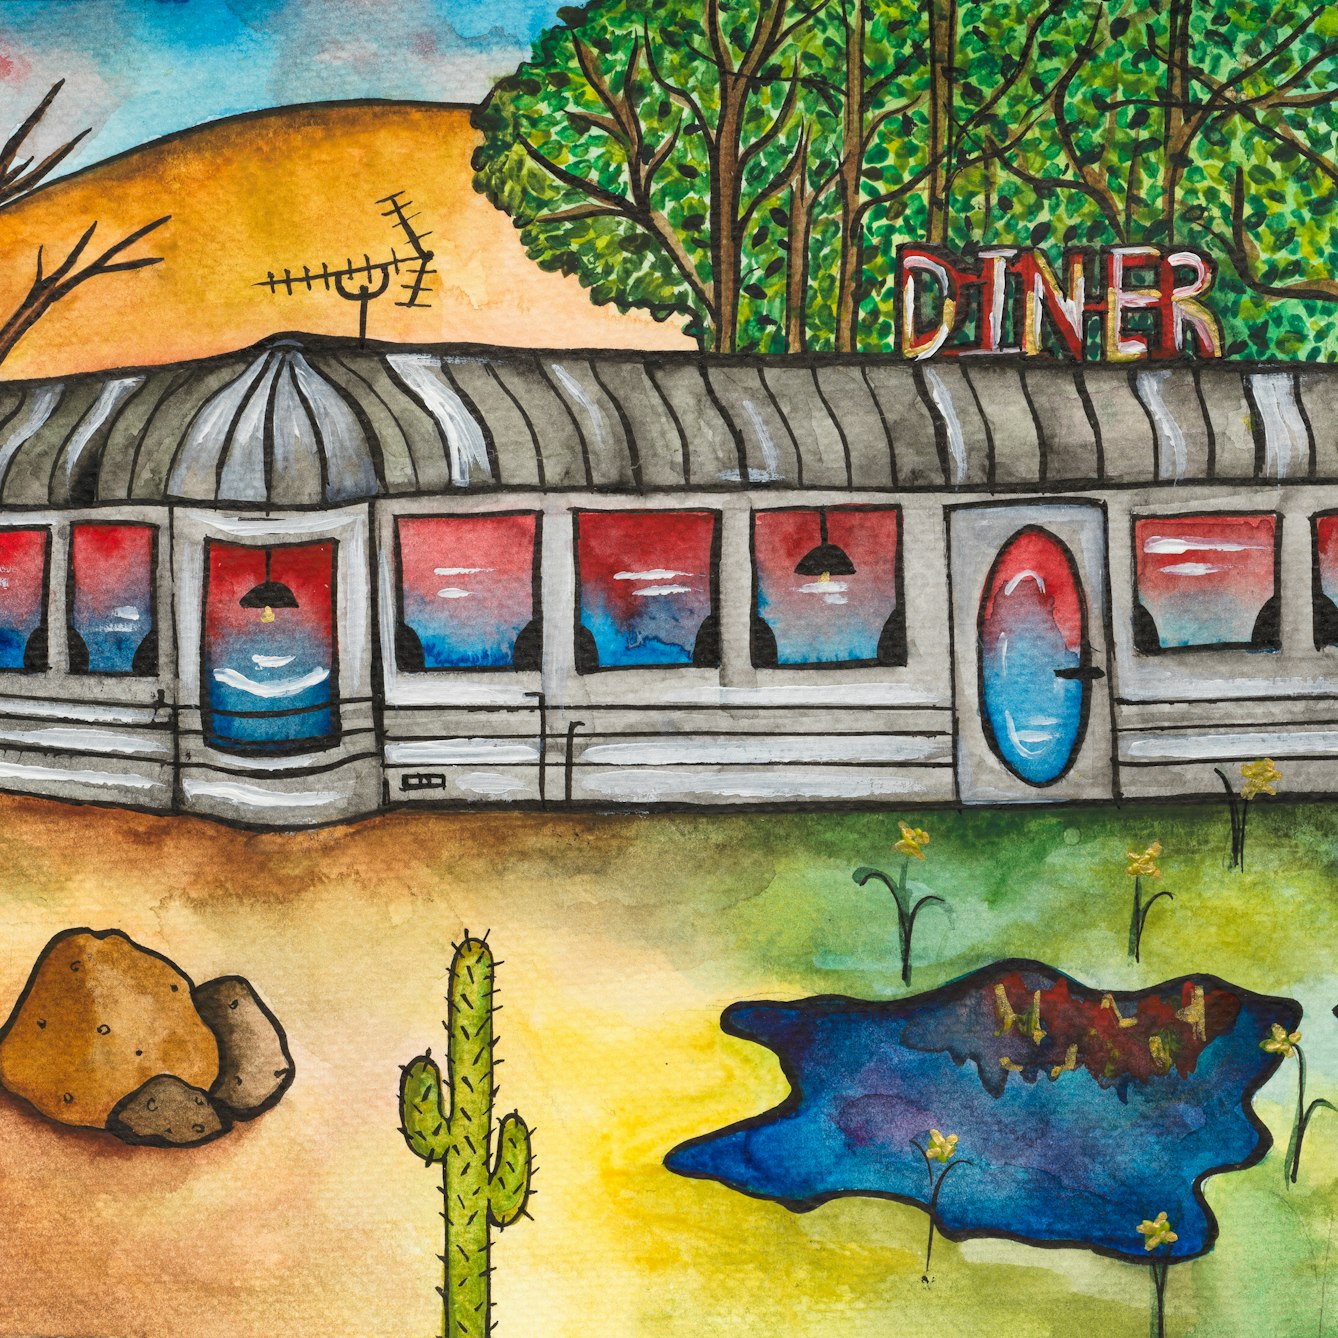 Colourful artwork. The artwork shows a grey building with a sign reading 'Diner' attached to the roof. There is also an aerial on the building roof. On the right side of the scene there is a woodland and the grass is green with flowers growing and a small pond. Immediately to the left of this, the ground is brown with rocks, cacti and trees with bare branches. Above these are several hills.